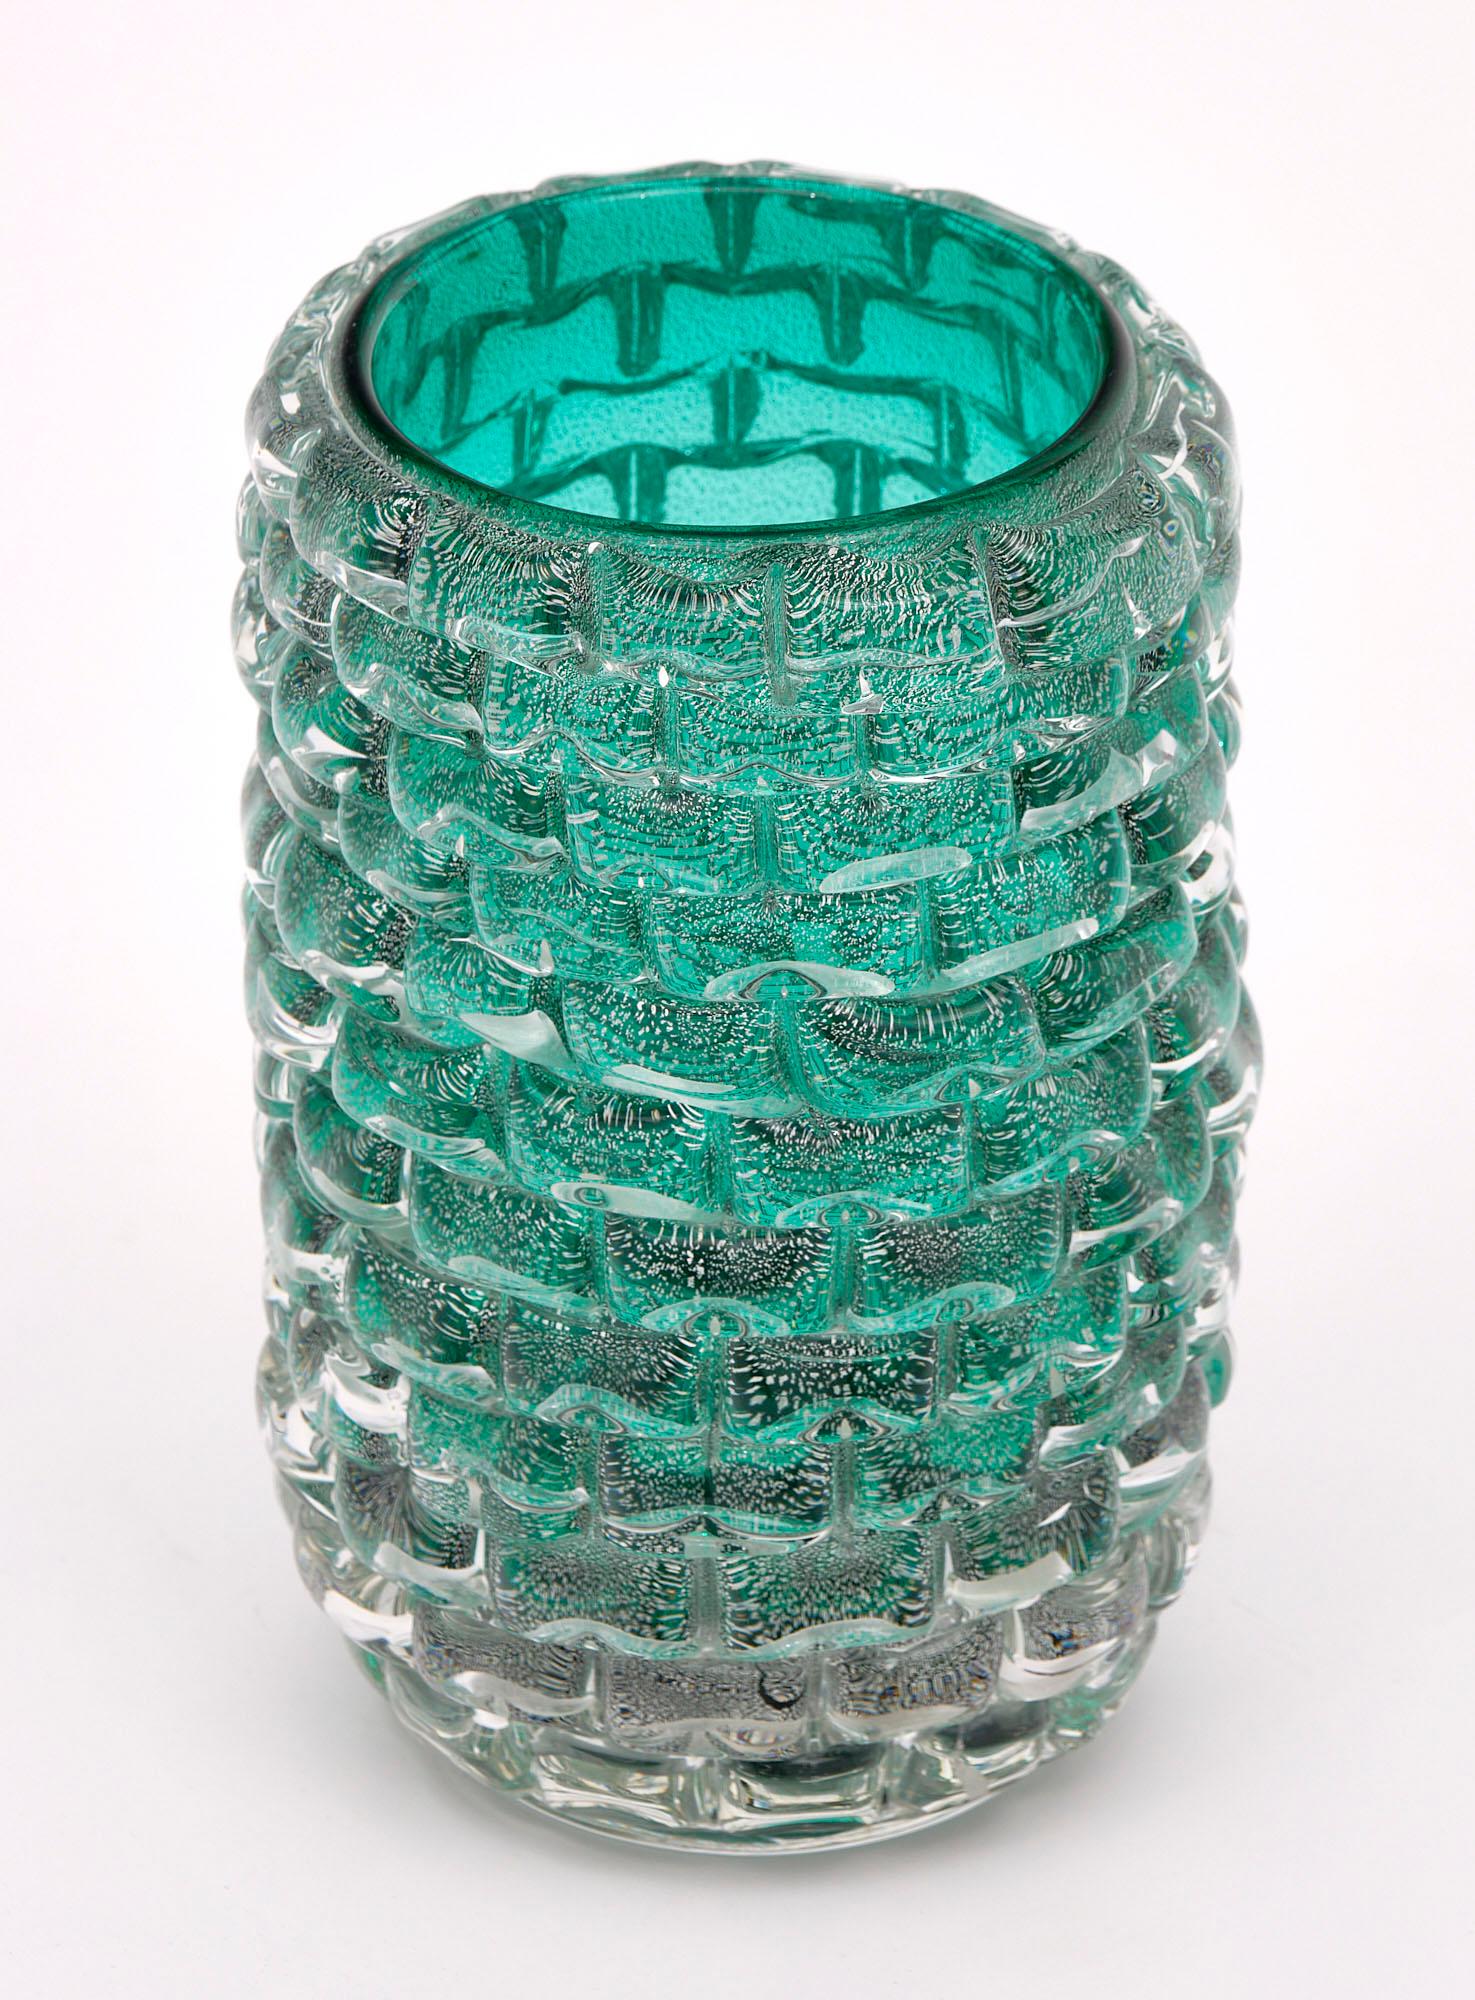 Vase from the island of Murano made of hand-blown glass in the “belle soffiate” technique.